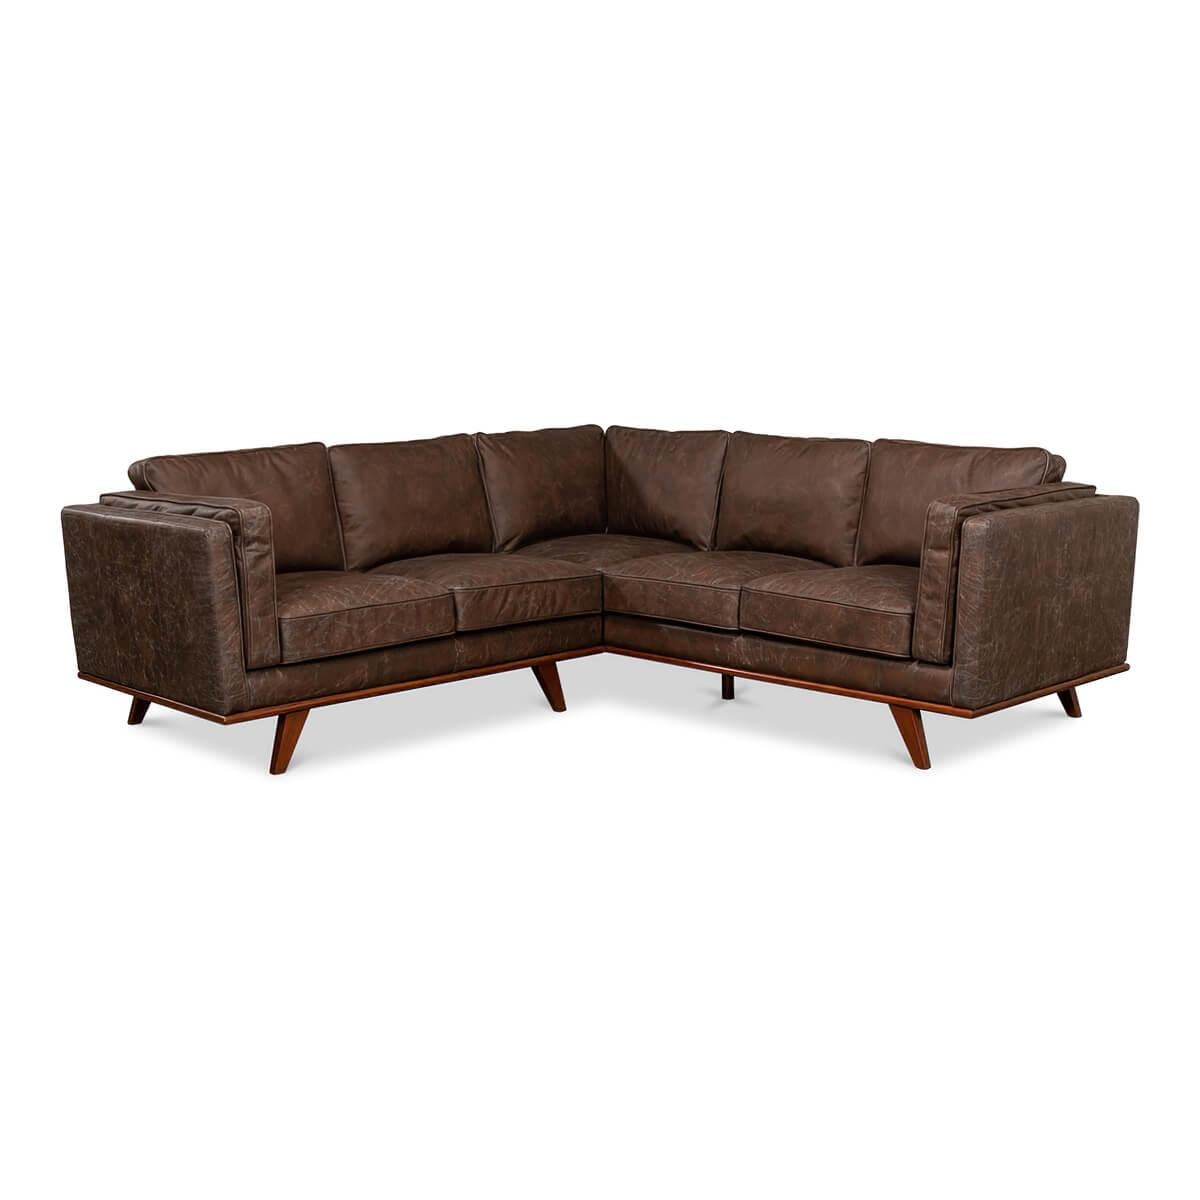 A European Mid-Century Modern style sectional sofa with antique brown leather and a dark stained maple frame with out-flaring tapered legs.

Dimensions: 91